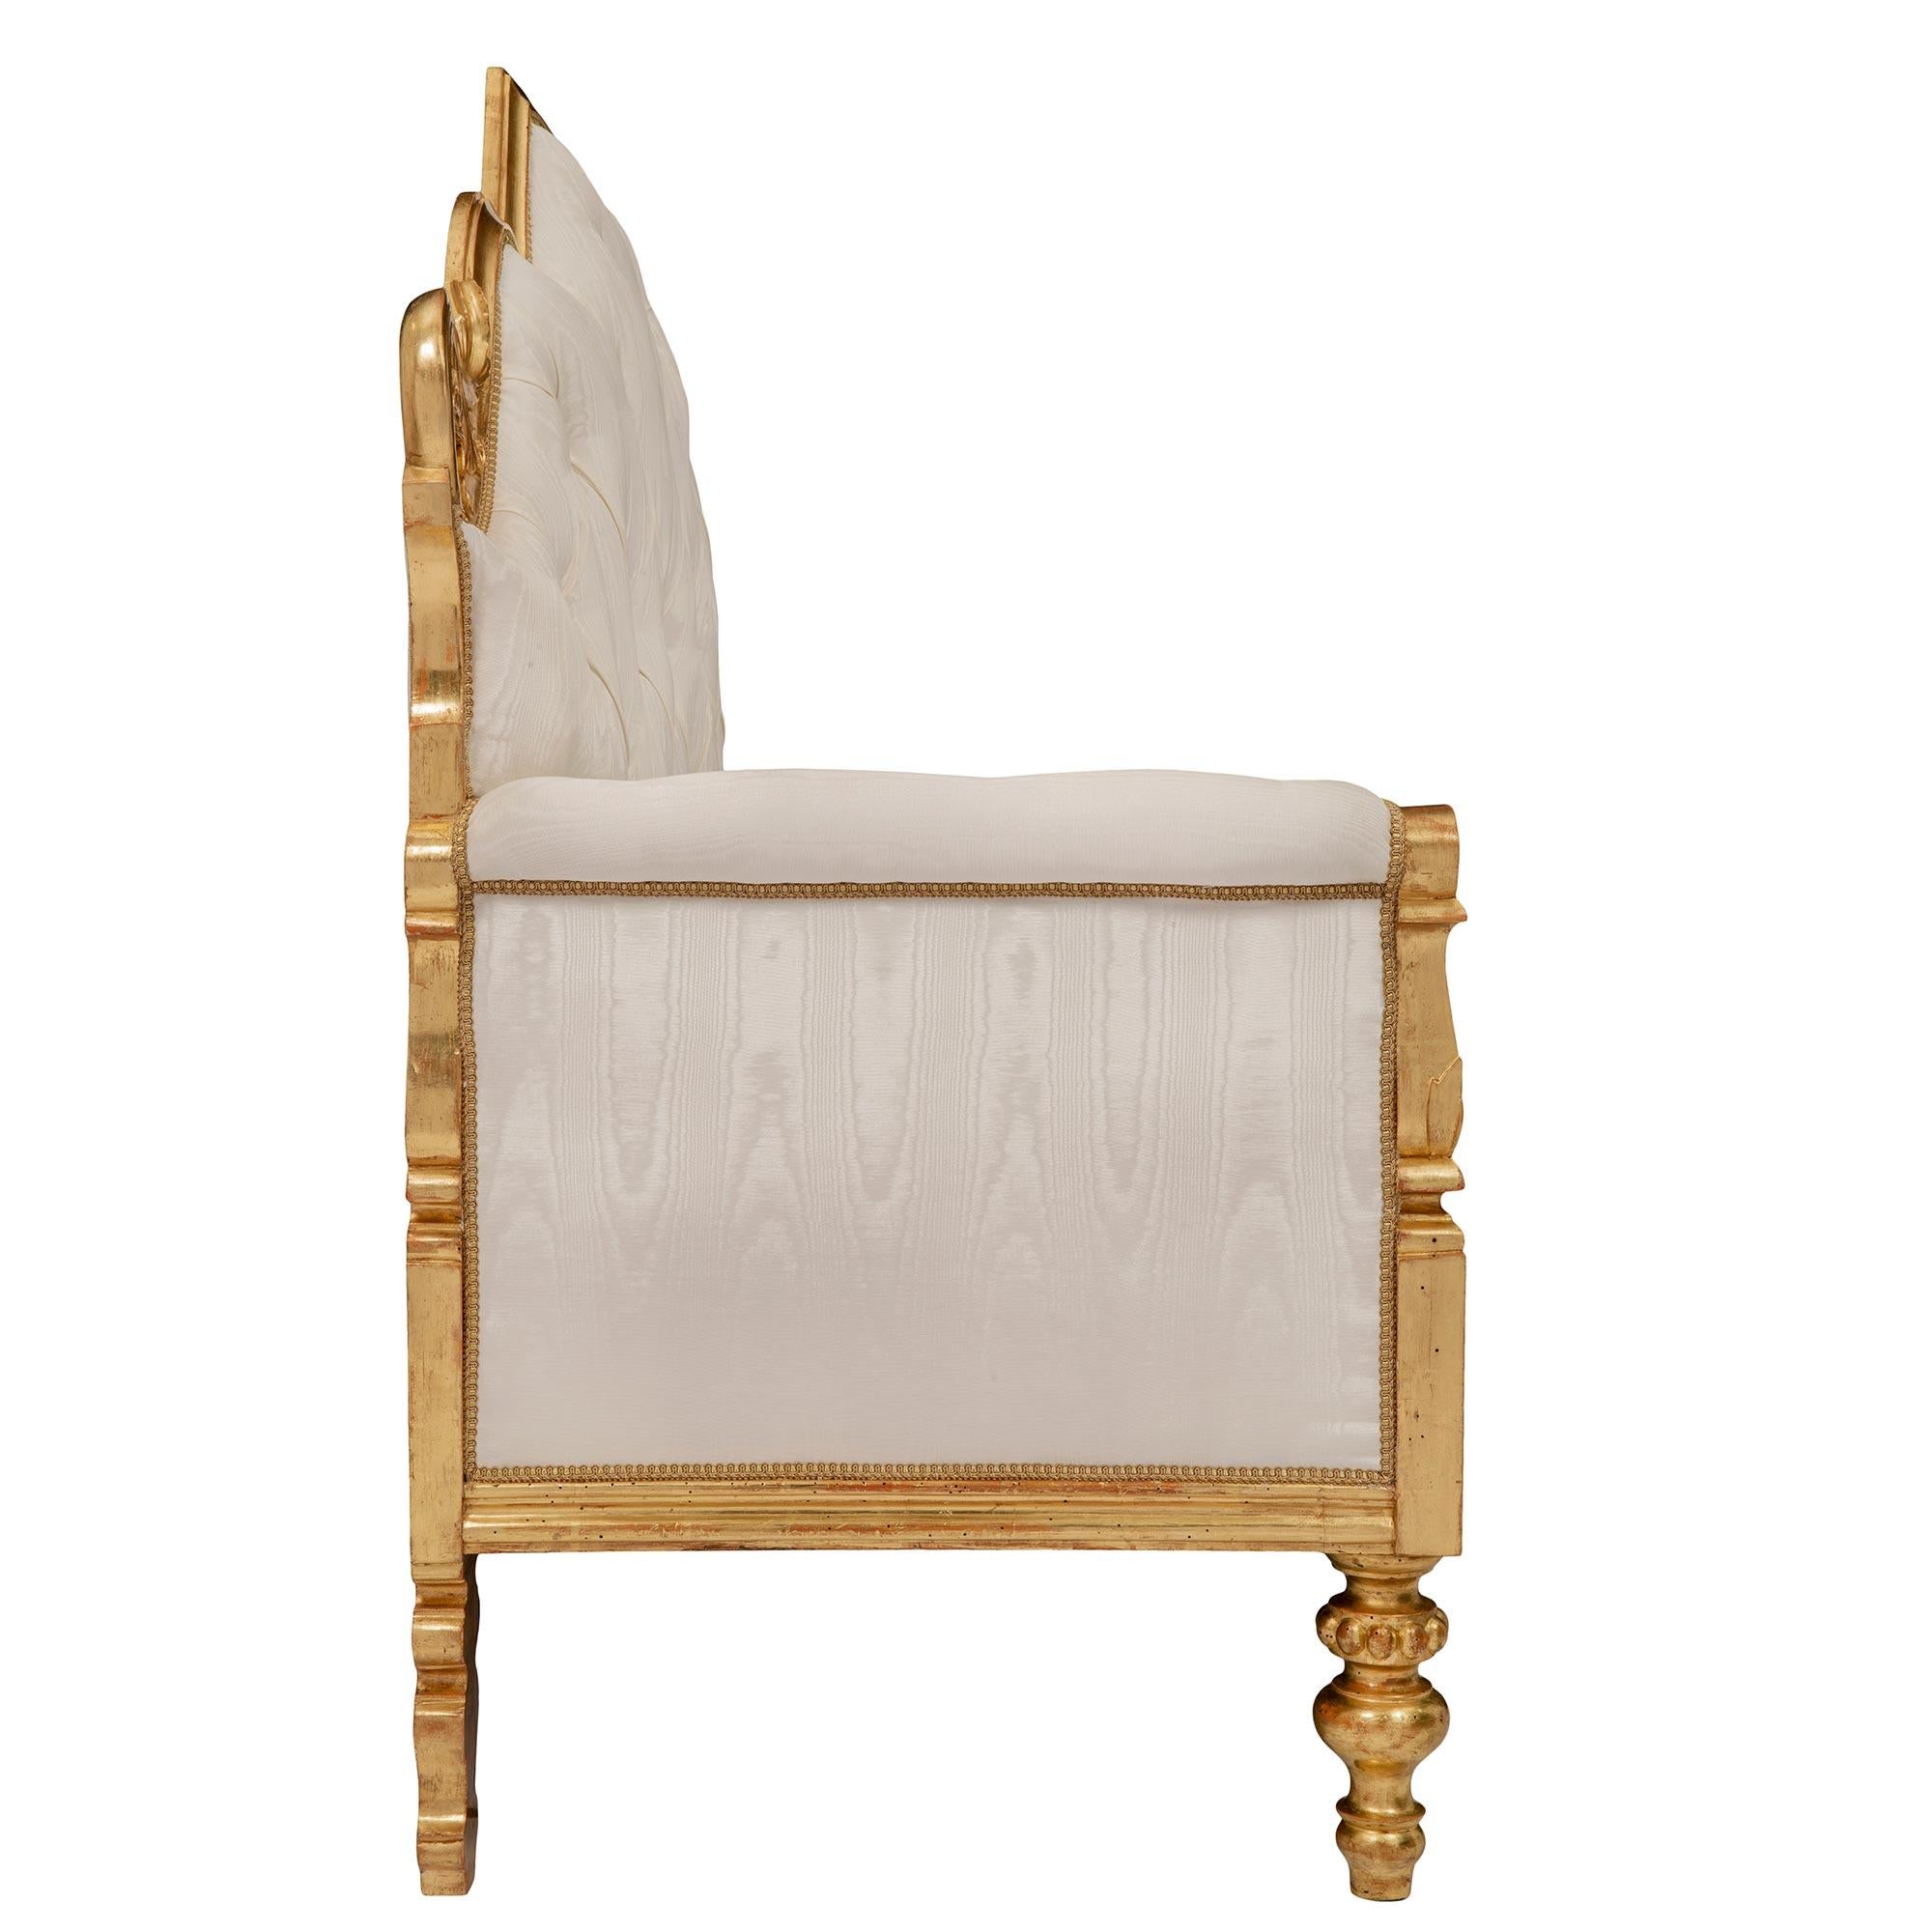 Italian 19th Century Giltwood Sette In Good Condition For Sale In West Palm Beach, FL